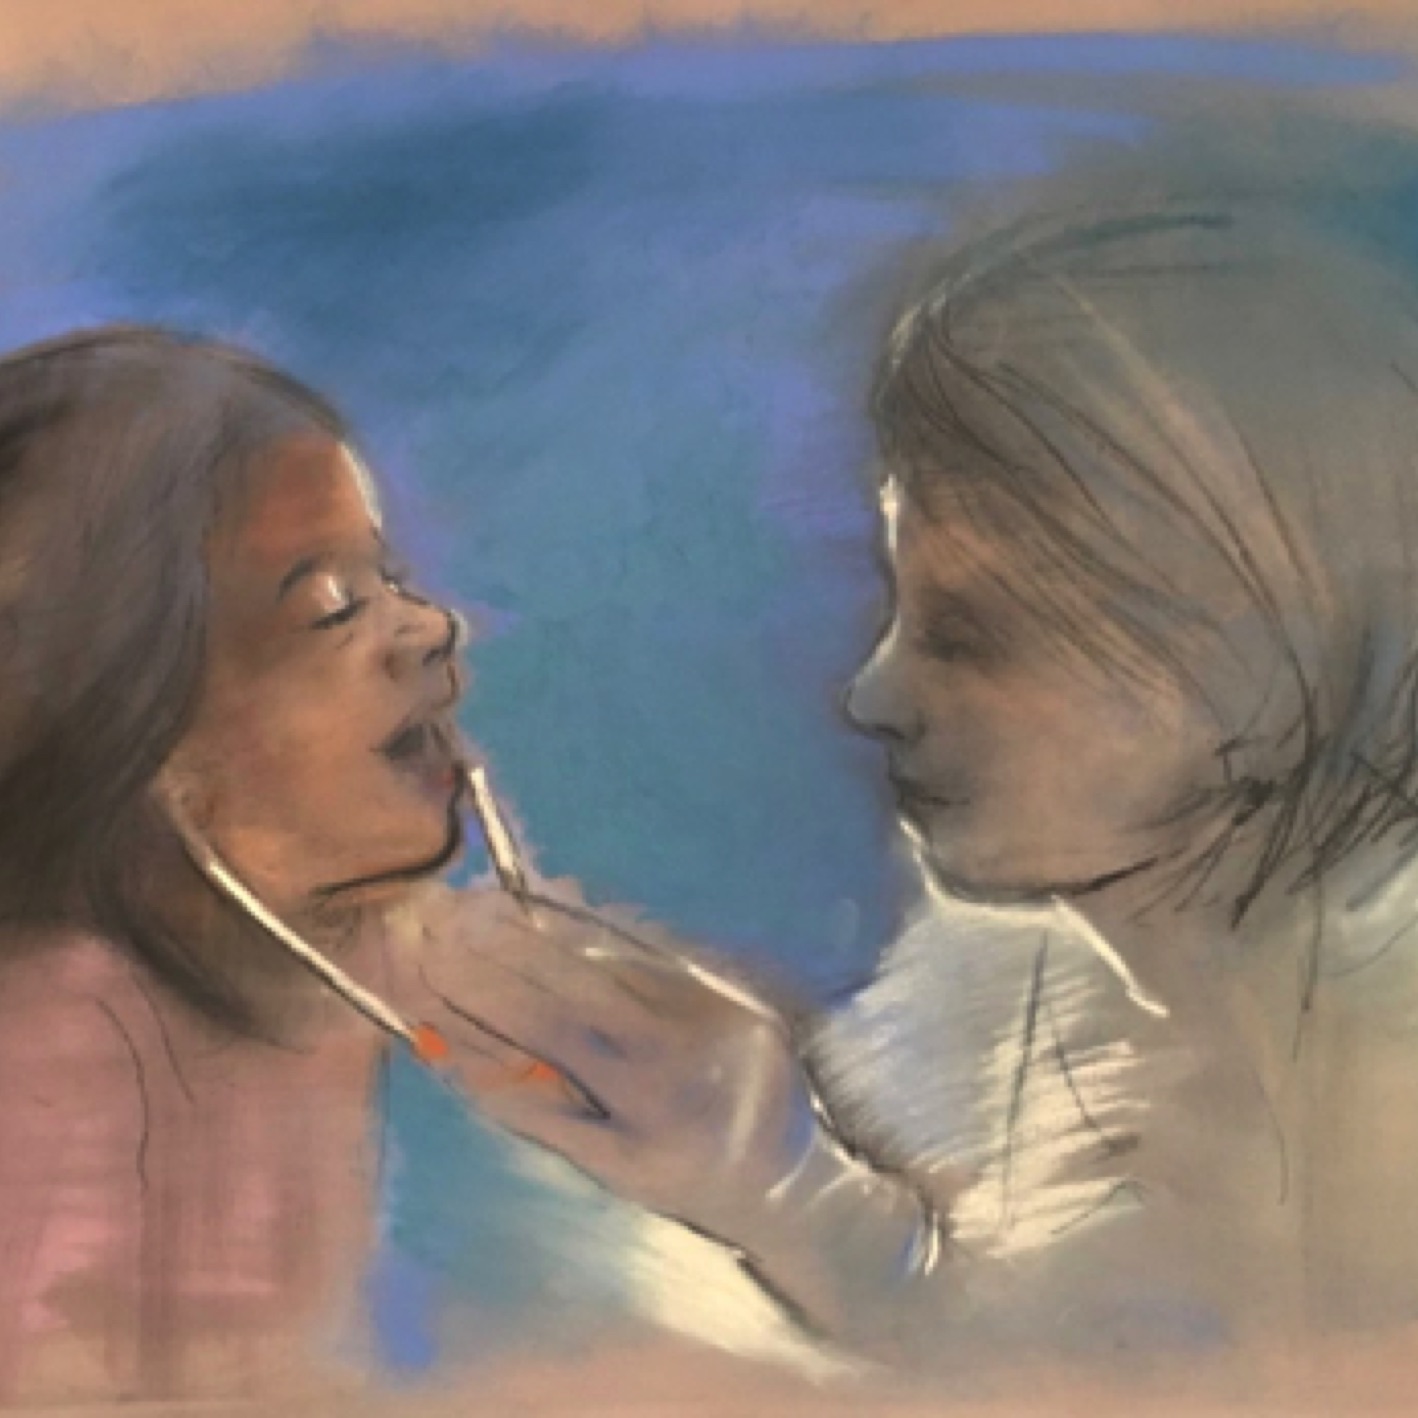 Gregg Chadwick
Caring for Children: Listening is Key
19 1/2” x 27 1/2” pastel on paper 2018
UCLA School of Nursing Collection